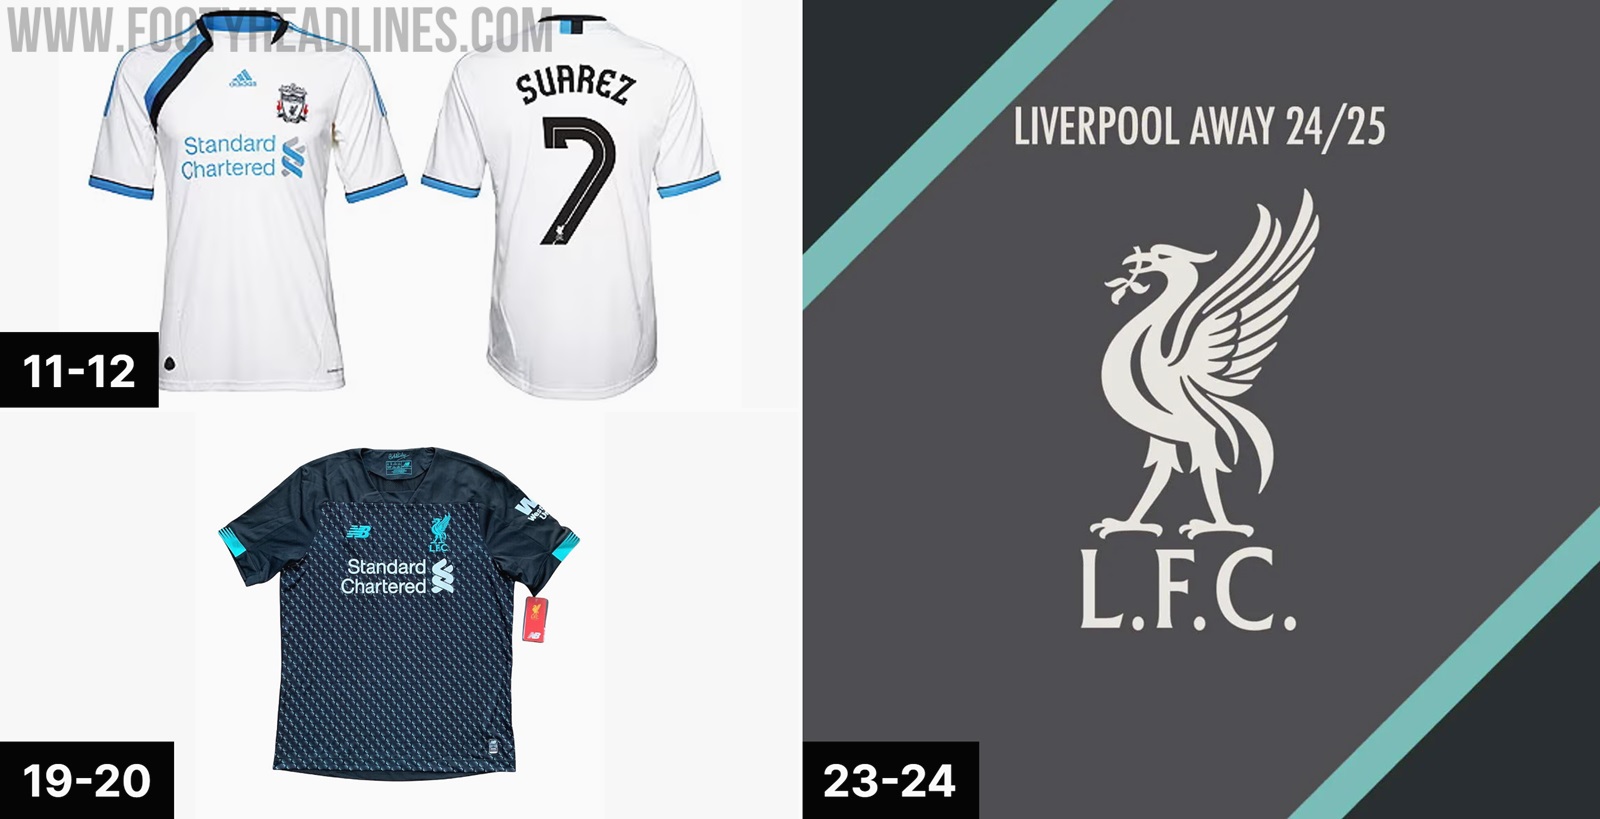 Liverpool 23/24 Kits for DLS 19